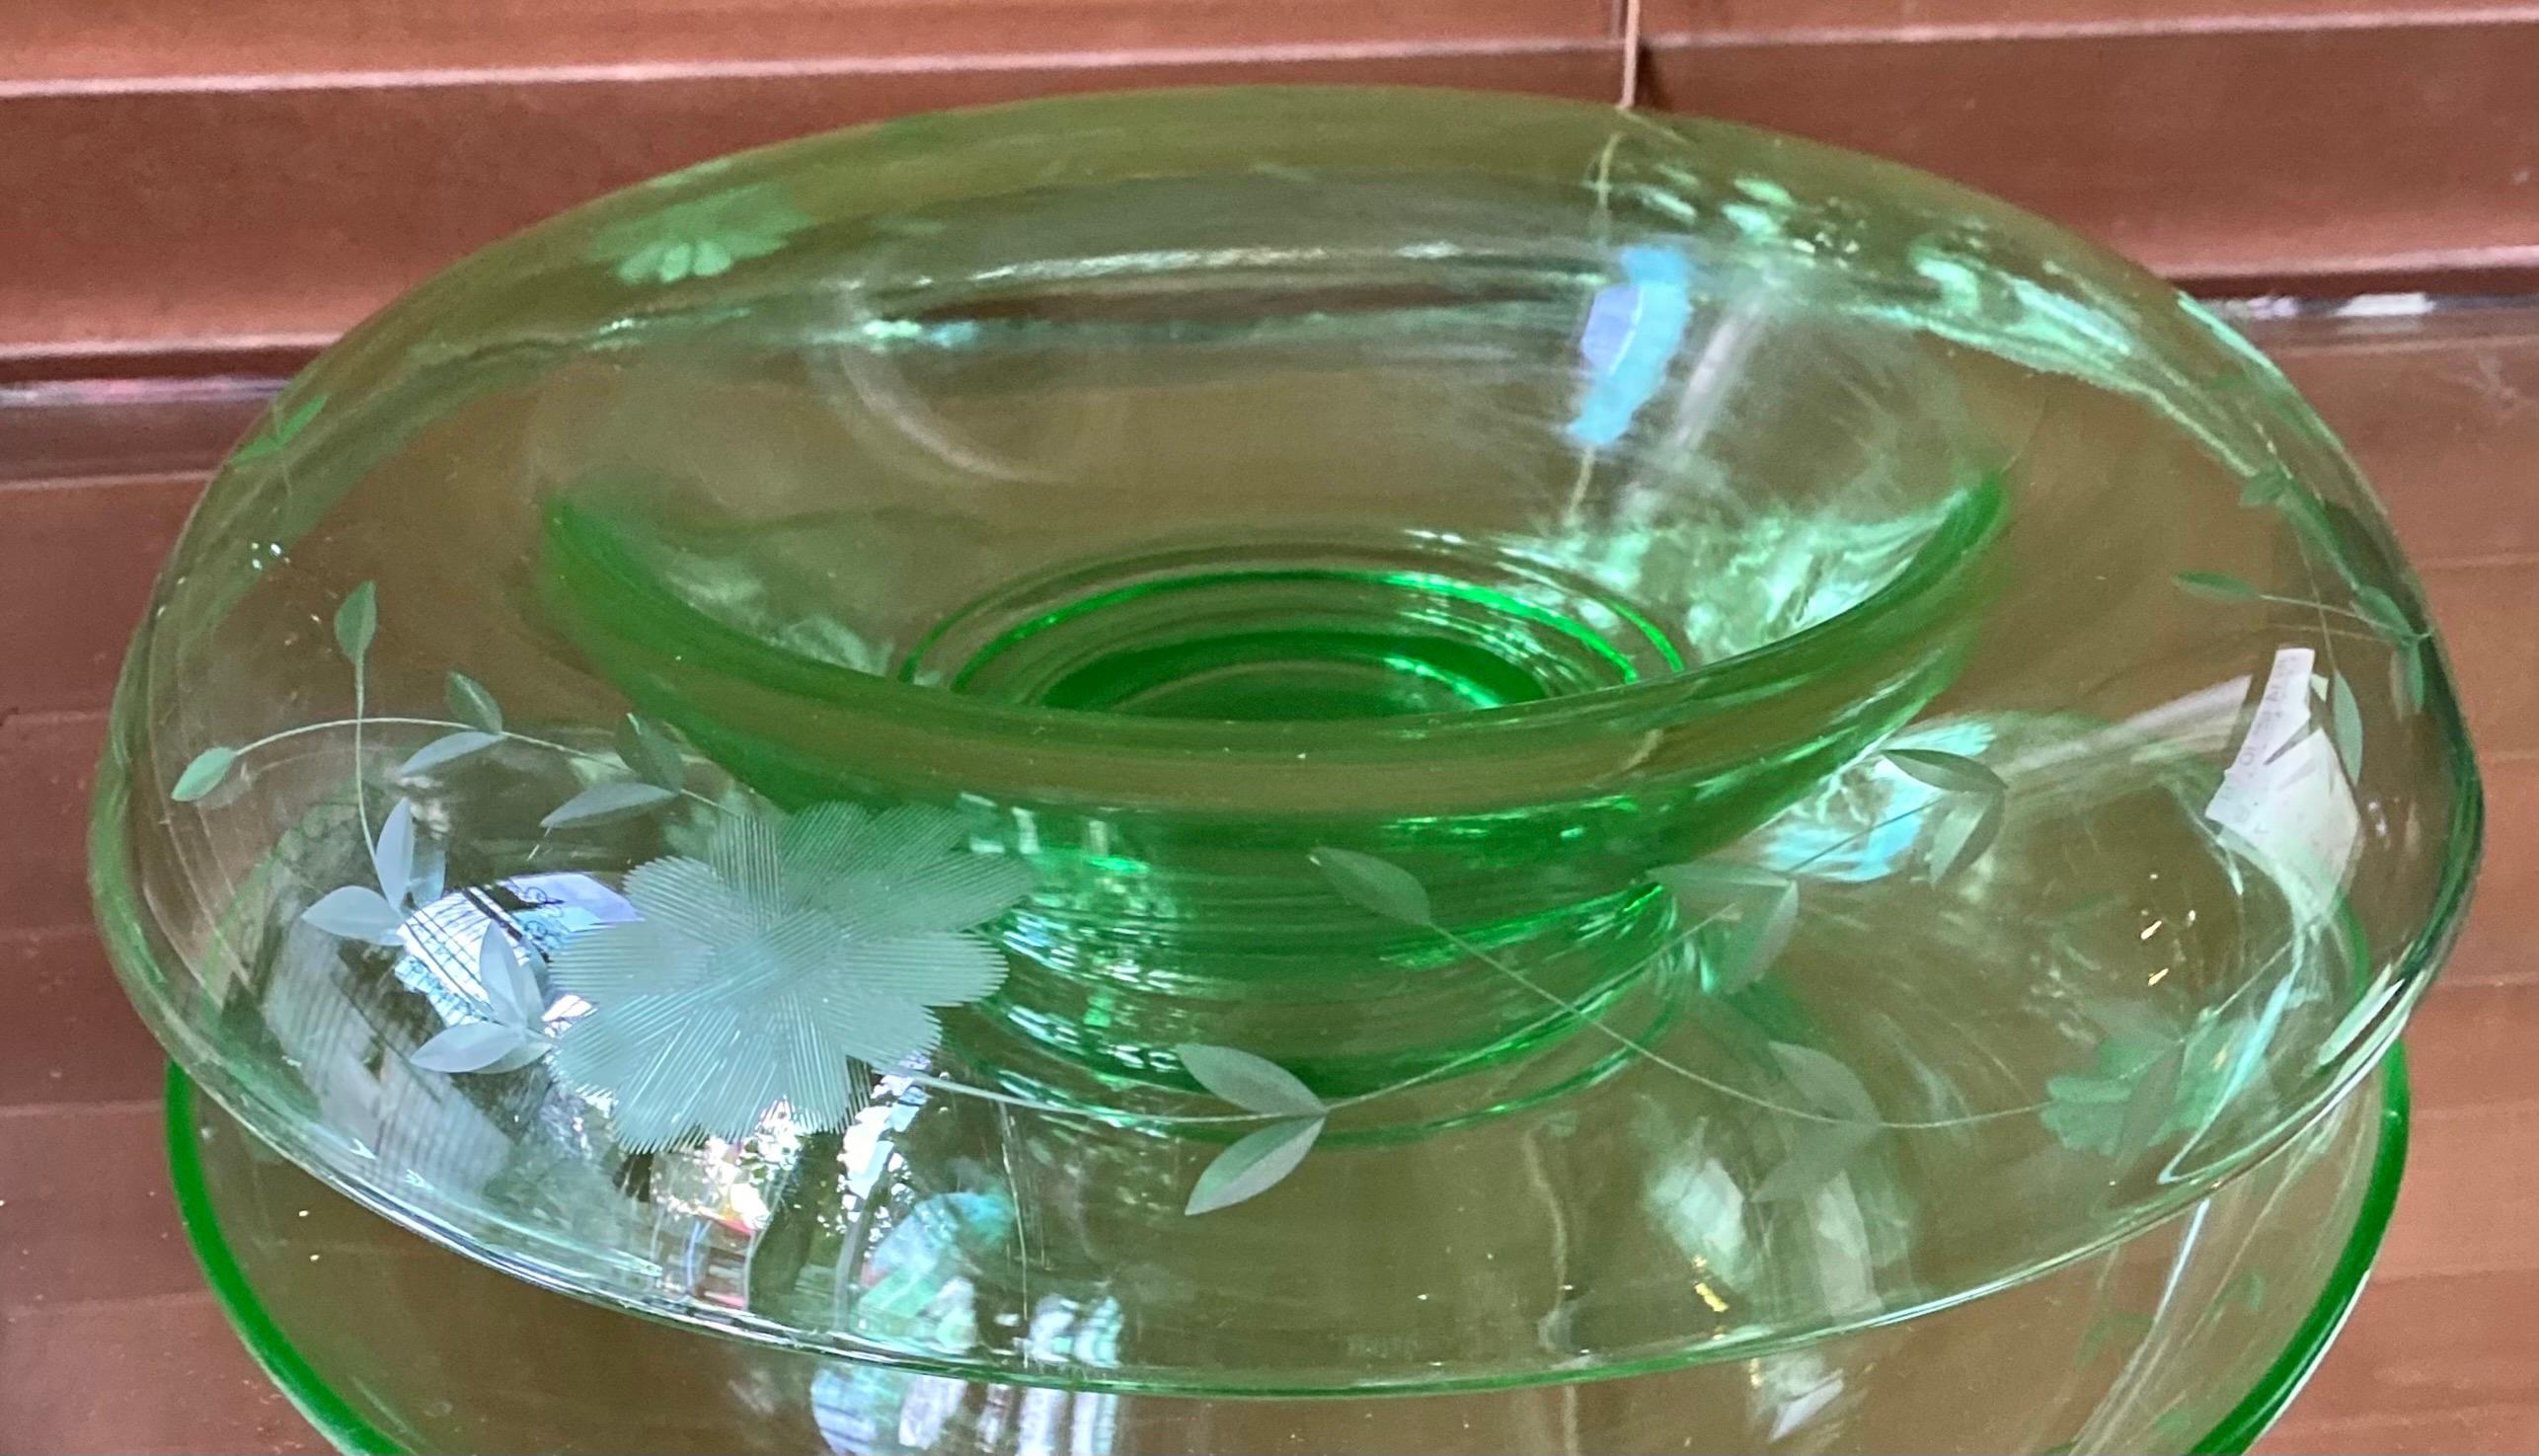 An antique depression uranium glass console bowl with a floral etched pattern. This type of bowl is fantastic as a centerpiece with floating candles. The piece is approximately 12 inches across with a 6 inch center. 

Uranium glass is glass which